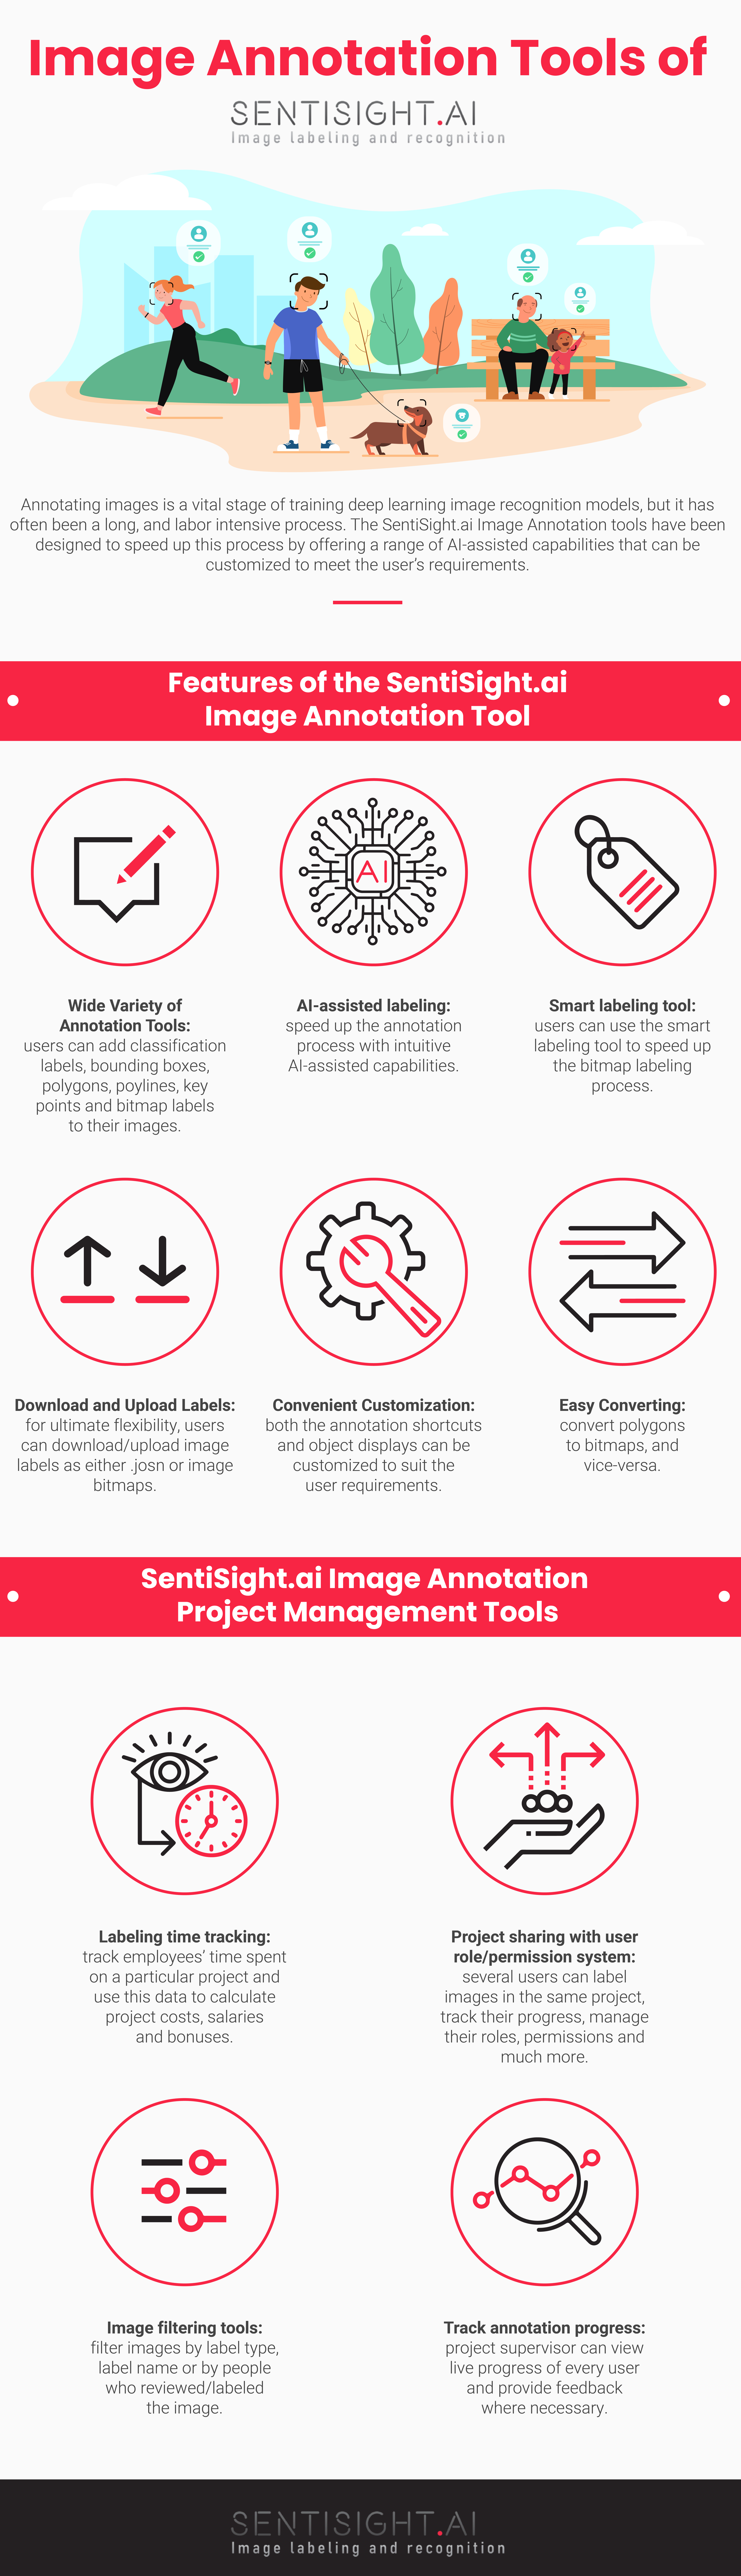 Available tools and features on the SentiSight.ai platform for annotating images.